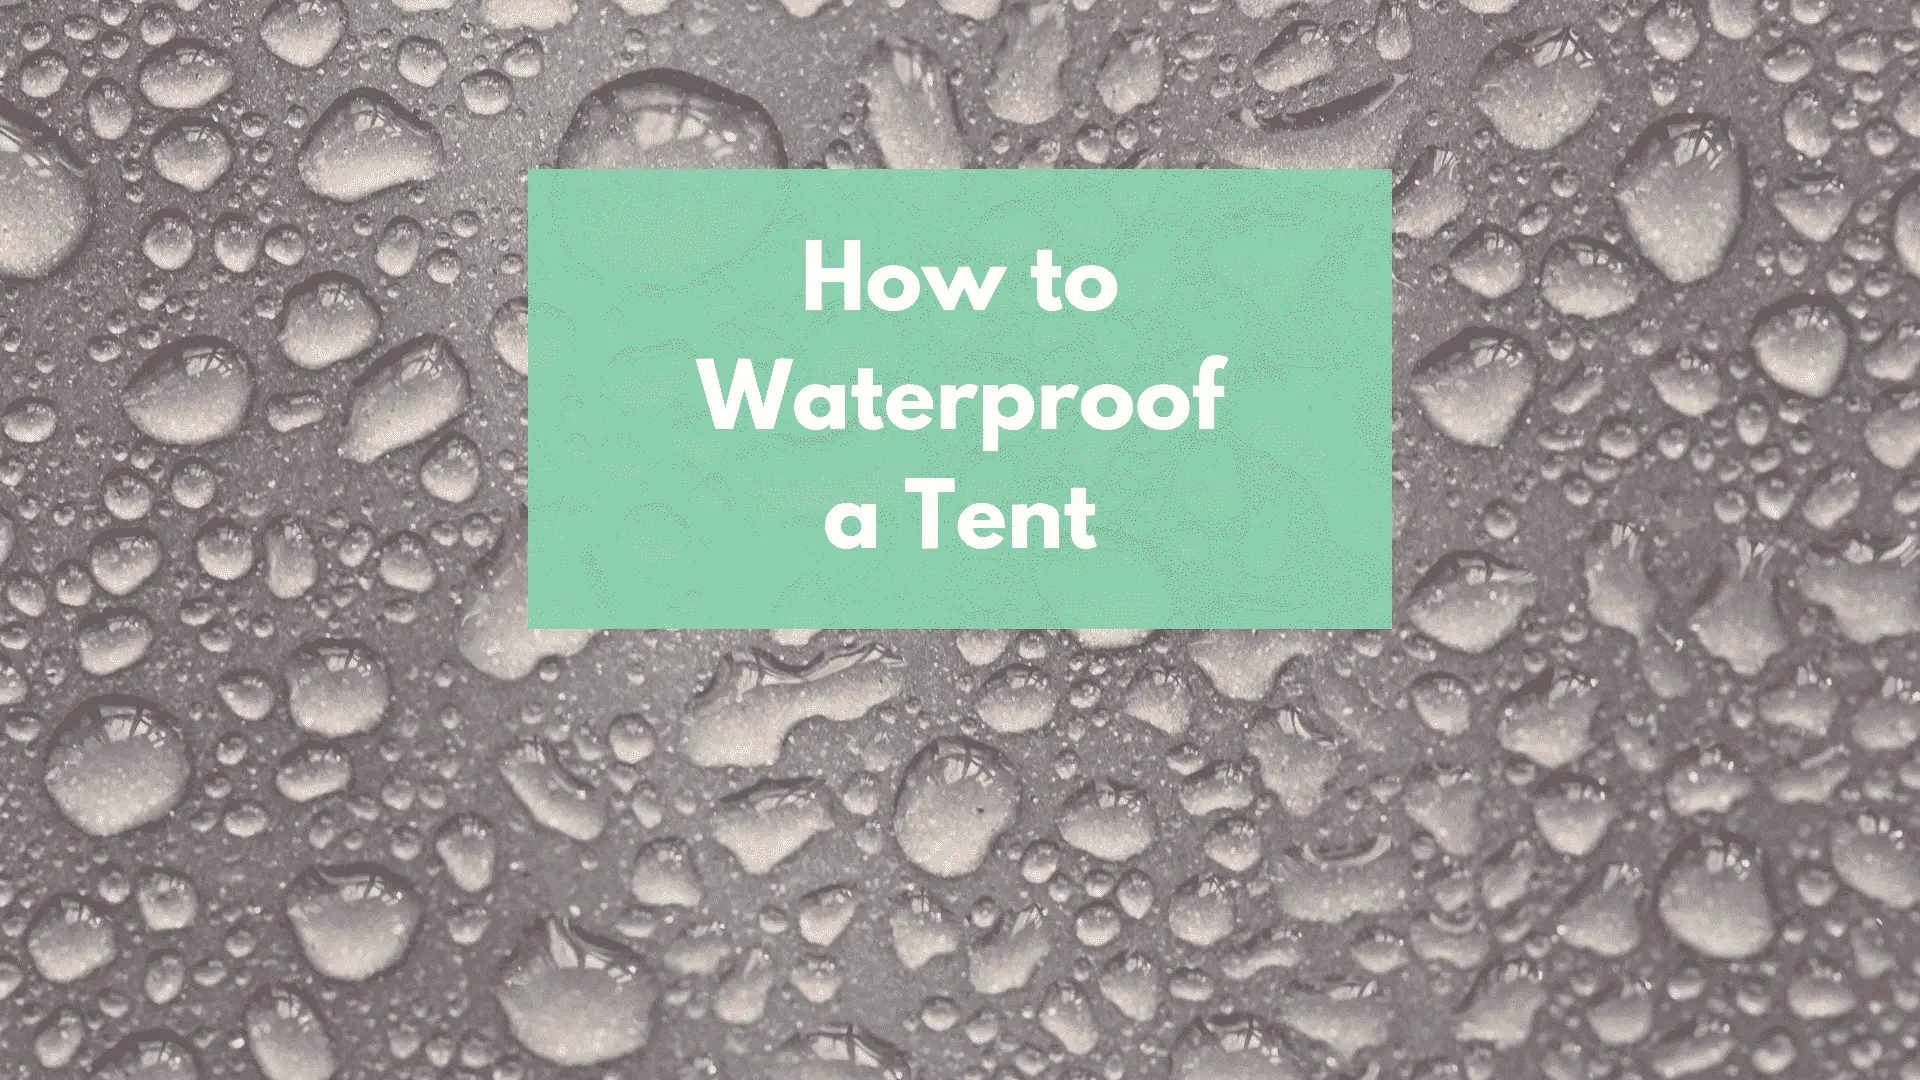 How to Waterproof a tent